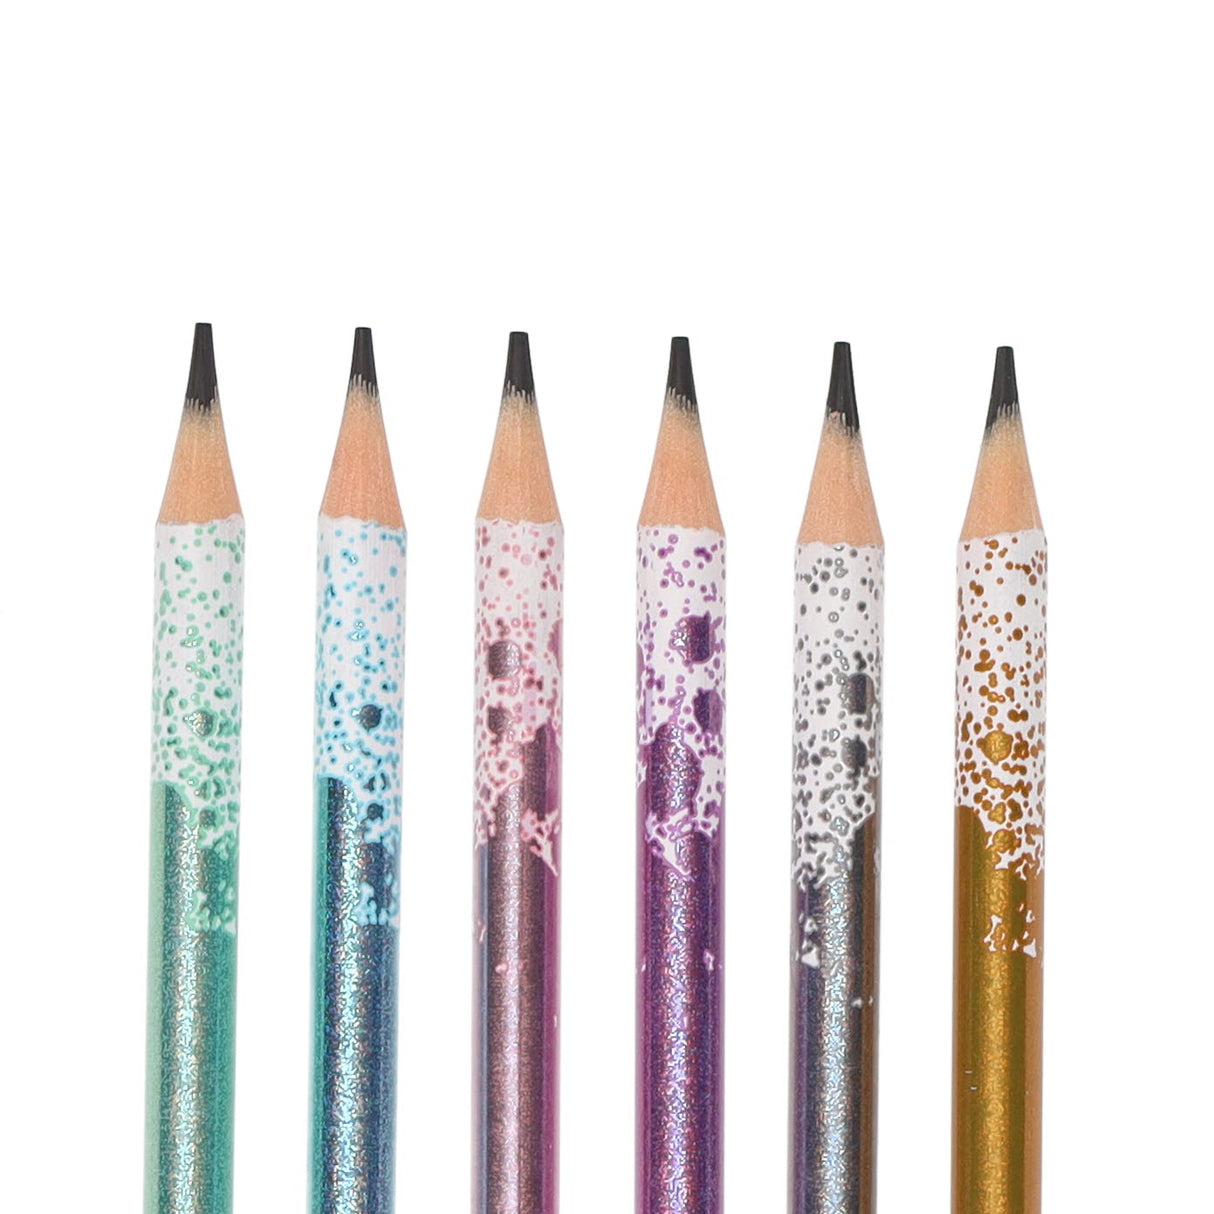 Maped Graph Hb Glitter Pencils with Eraser - Pack of 6 | Stationery Shop UK